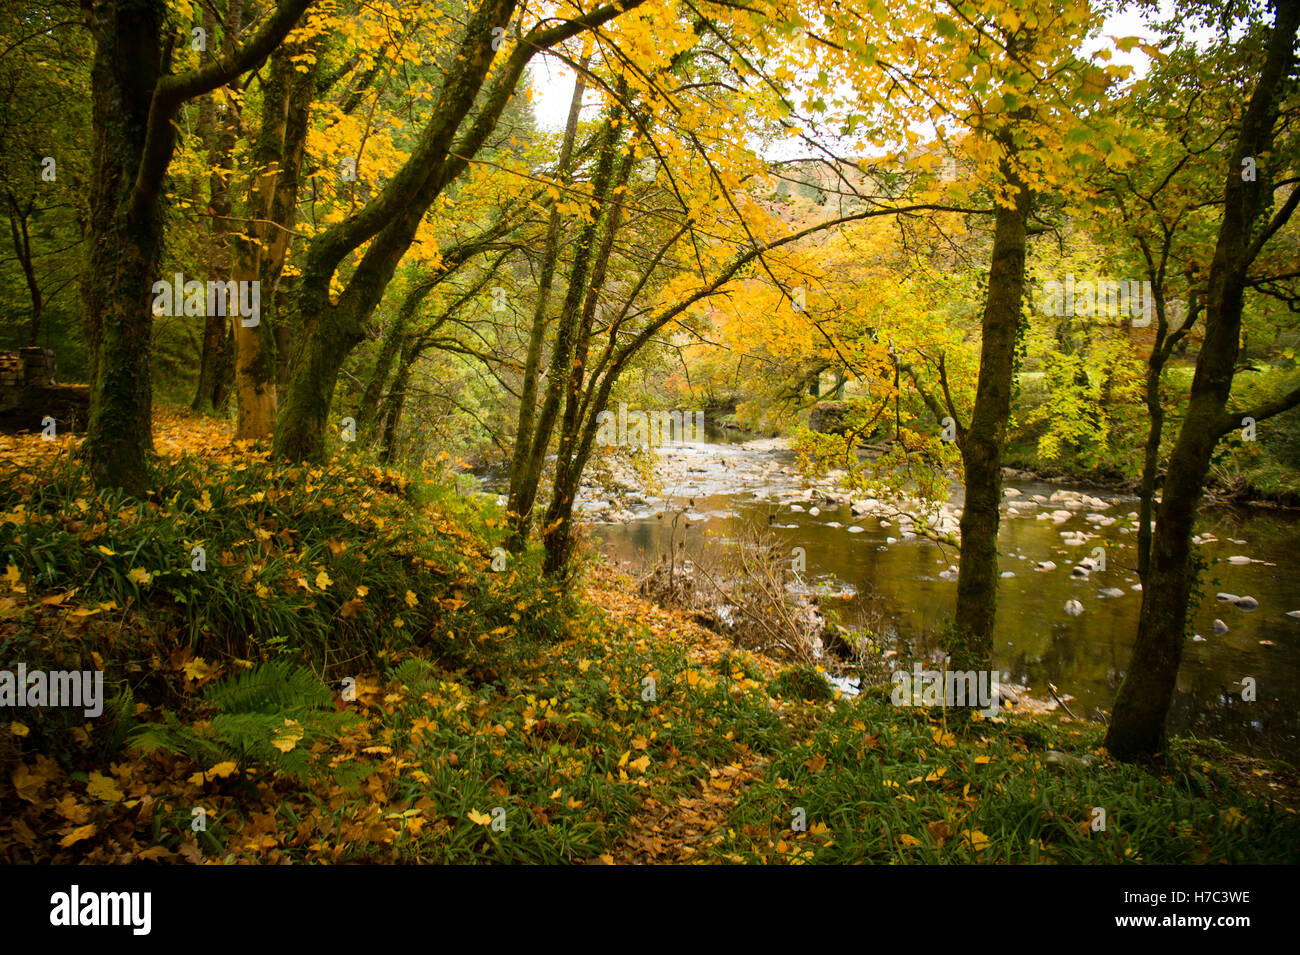 The river Mawddach flowing amongst the autumn colours and fallen leaves in Tyn y Groes forest park, near  Dolgellau , Snowdonia National Park, Wales UK October 2016 Stock Photo